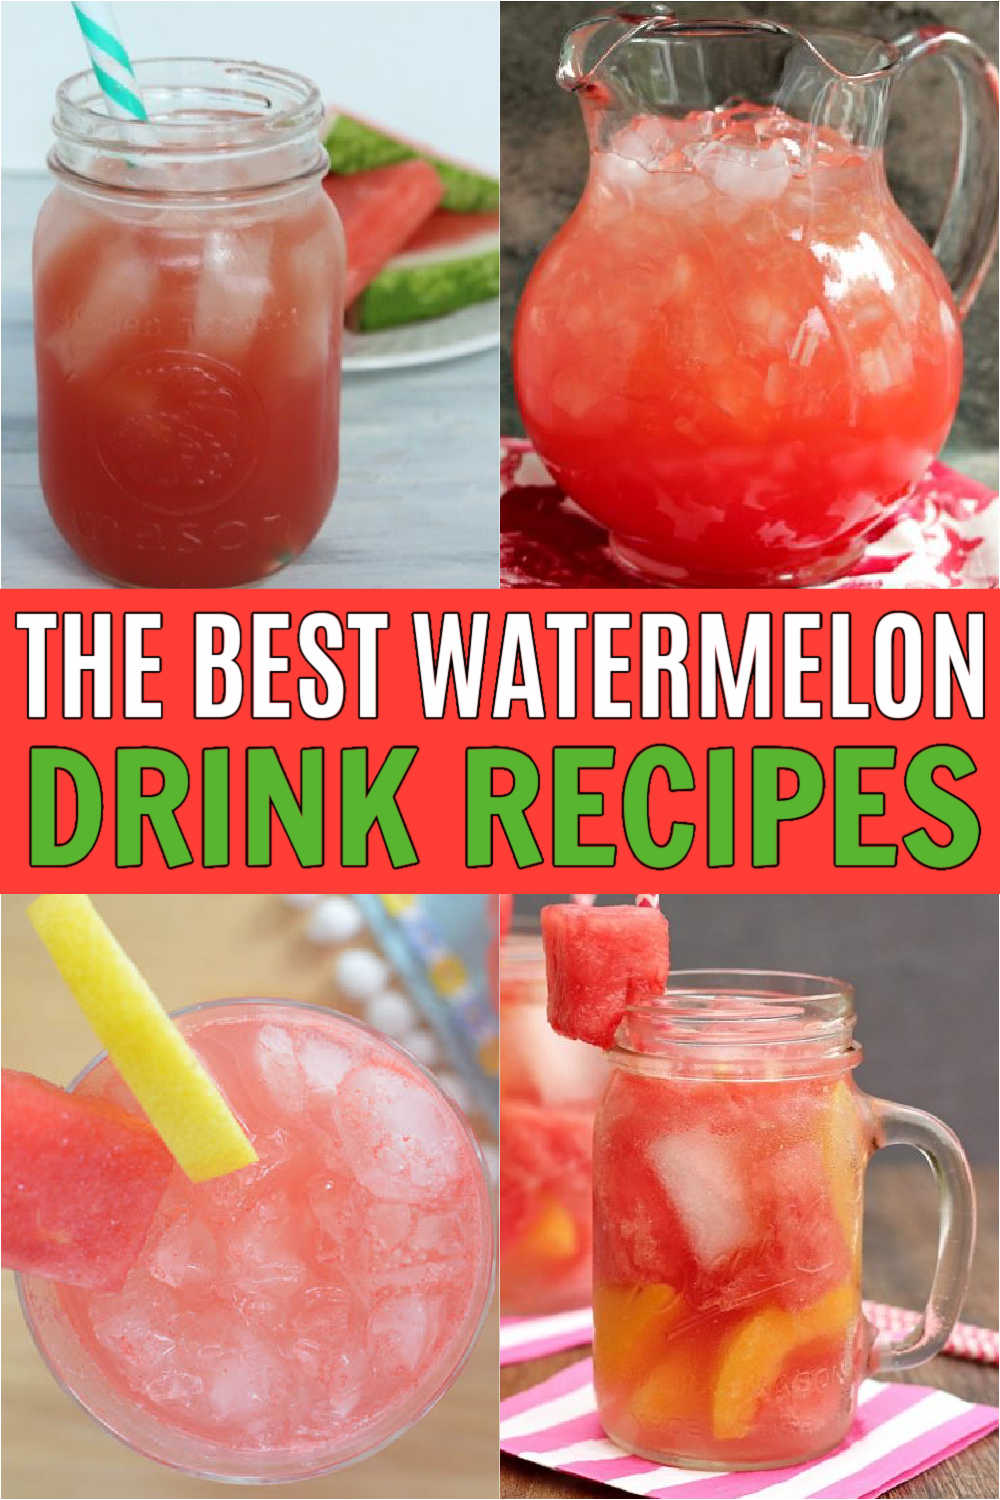 Try these Watermelon drink recipes anytime you need a cool and refreshing drink in minutes. Beat the heat with these easy, nonalcoholic and tasty drinks that are perfect for kids and for adults! #eatingonadime #drinkrecipes #watermelonrecipes #easyrecipes 